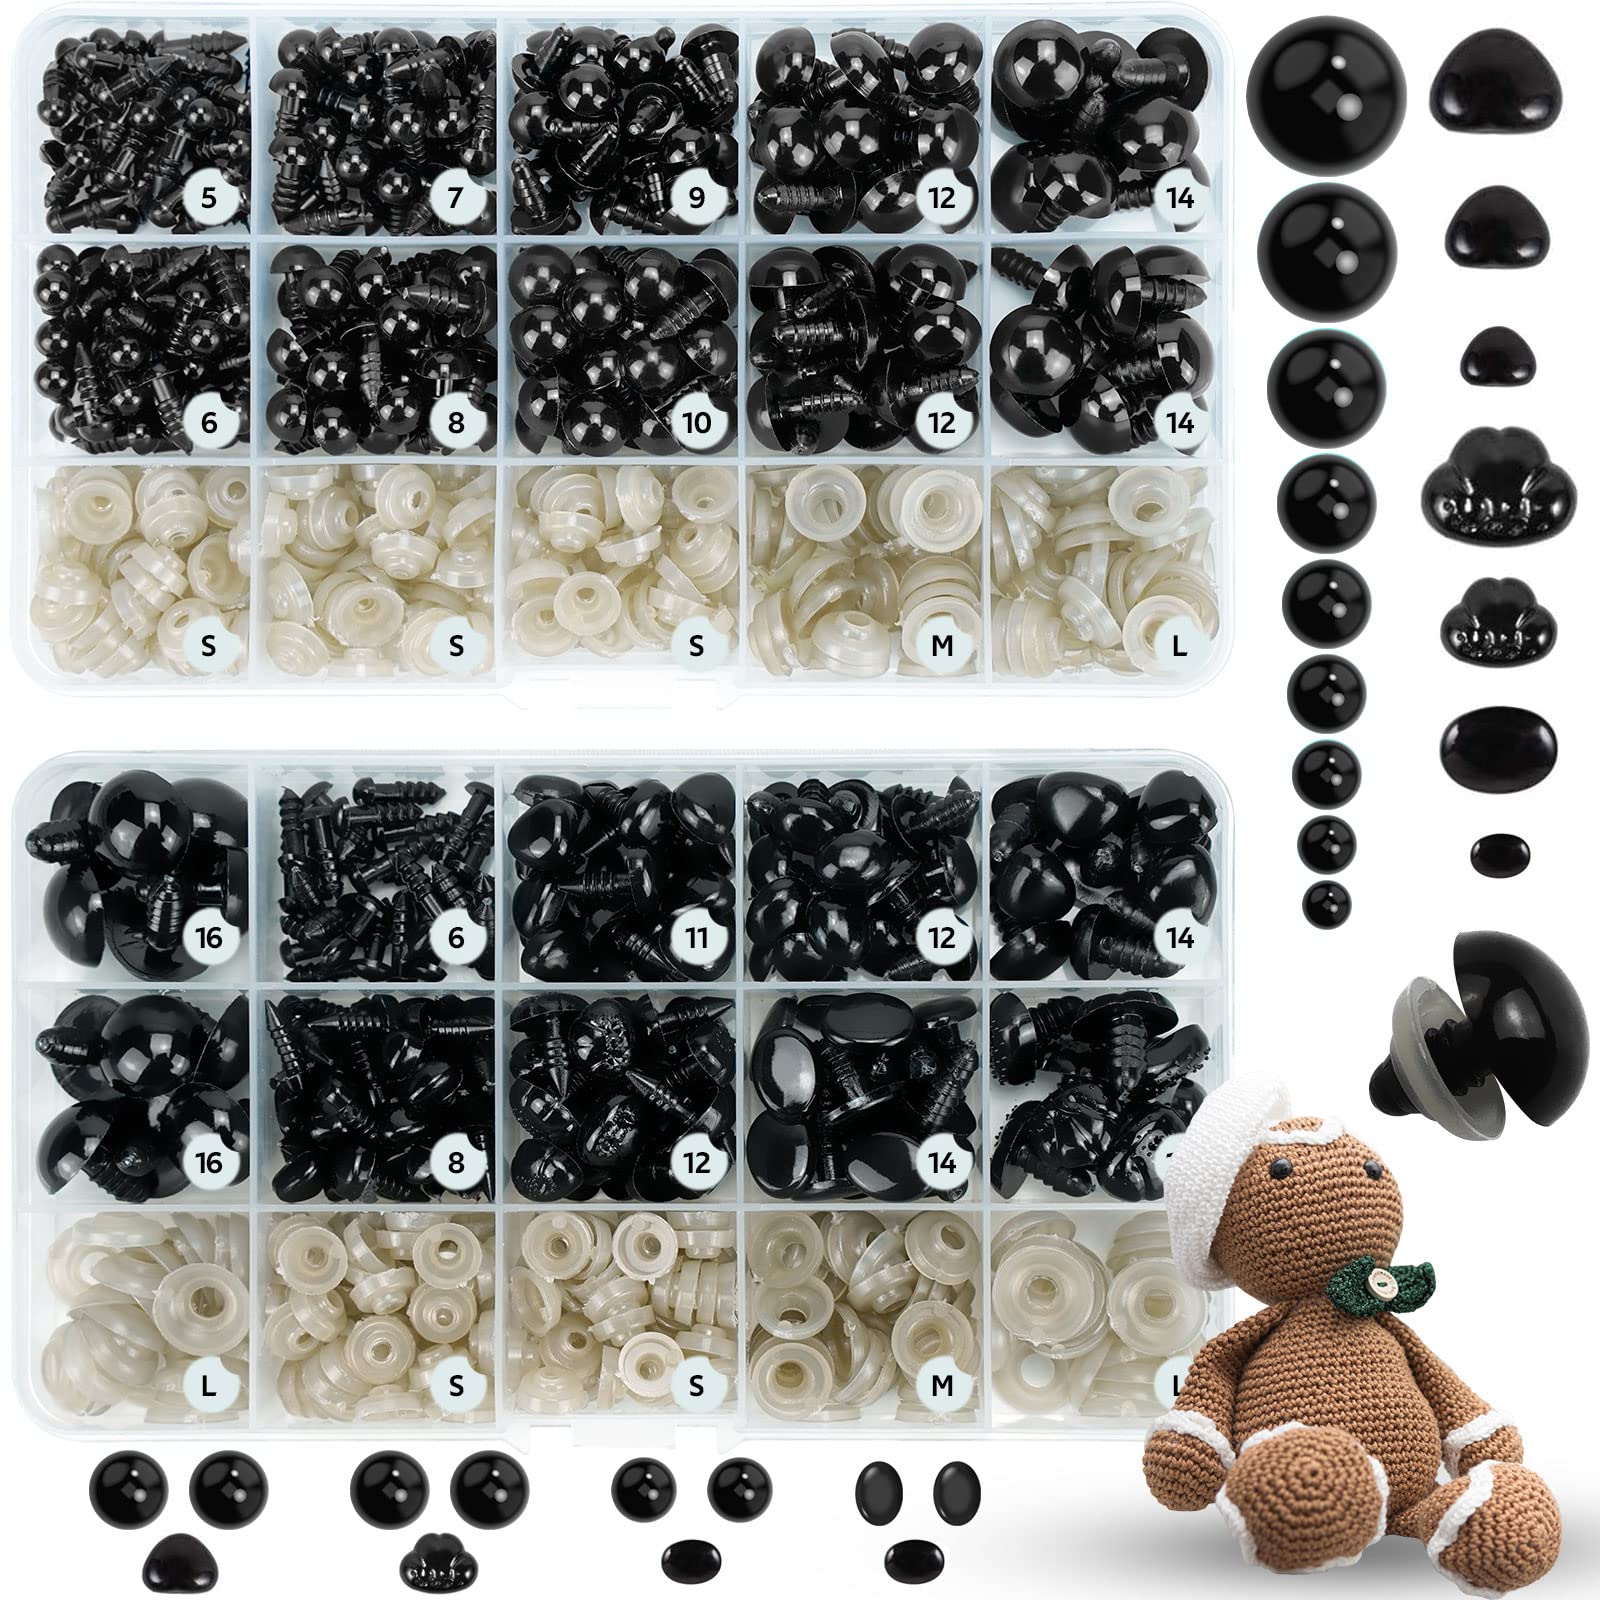 800PCS Safety Eyes and Noses for Amigurumi 2 Boxes Crochet Eyes with Size  Chart Black Plastic Craft Doll Eyes with Washers for Crochet Stuffed  Animals Crochet Toy and Teddy Bear Assorted Sizes